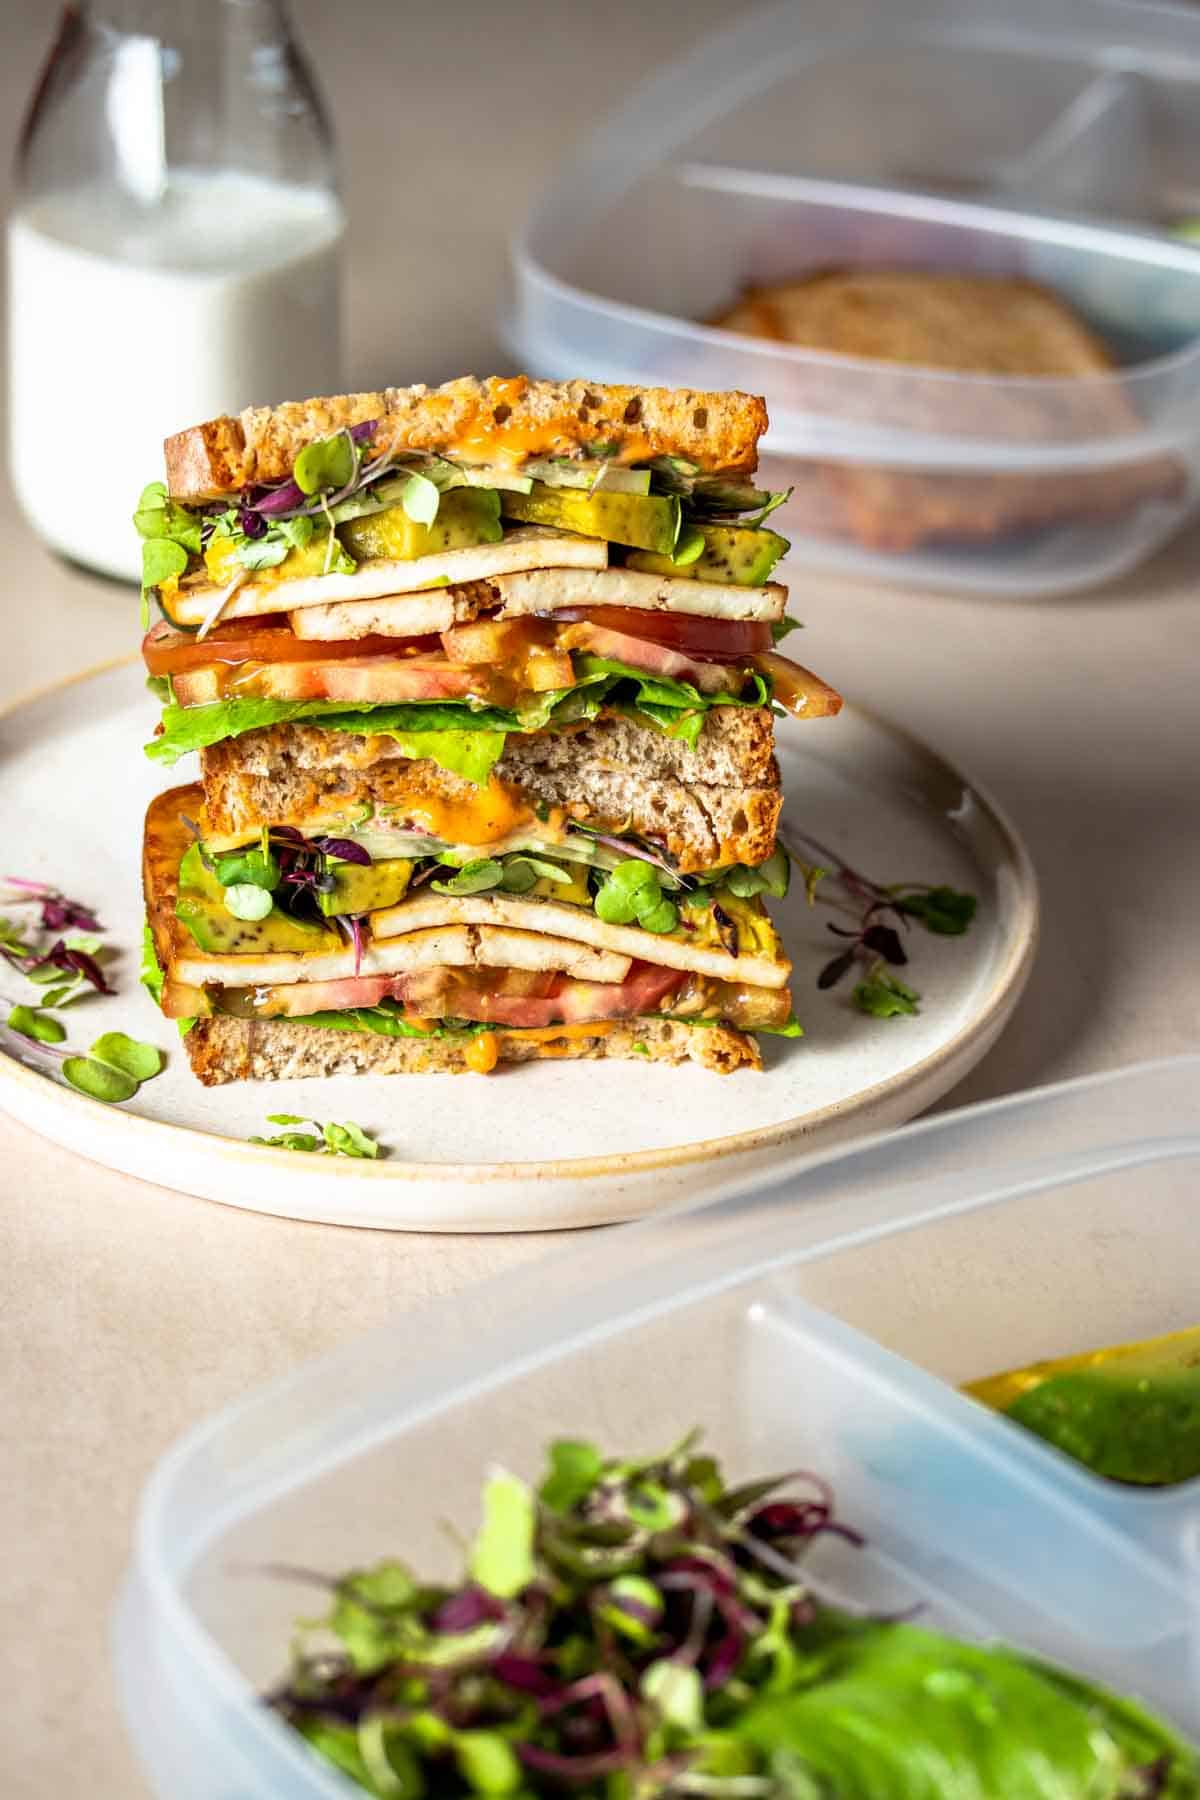 A plate with two halves of a tofu veggie sandwich stacked on each other surrounded by plastic containers and a glass of milk.